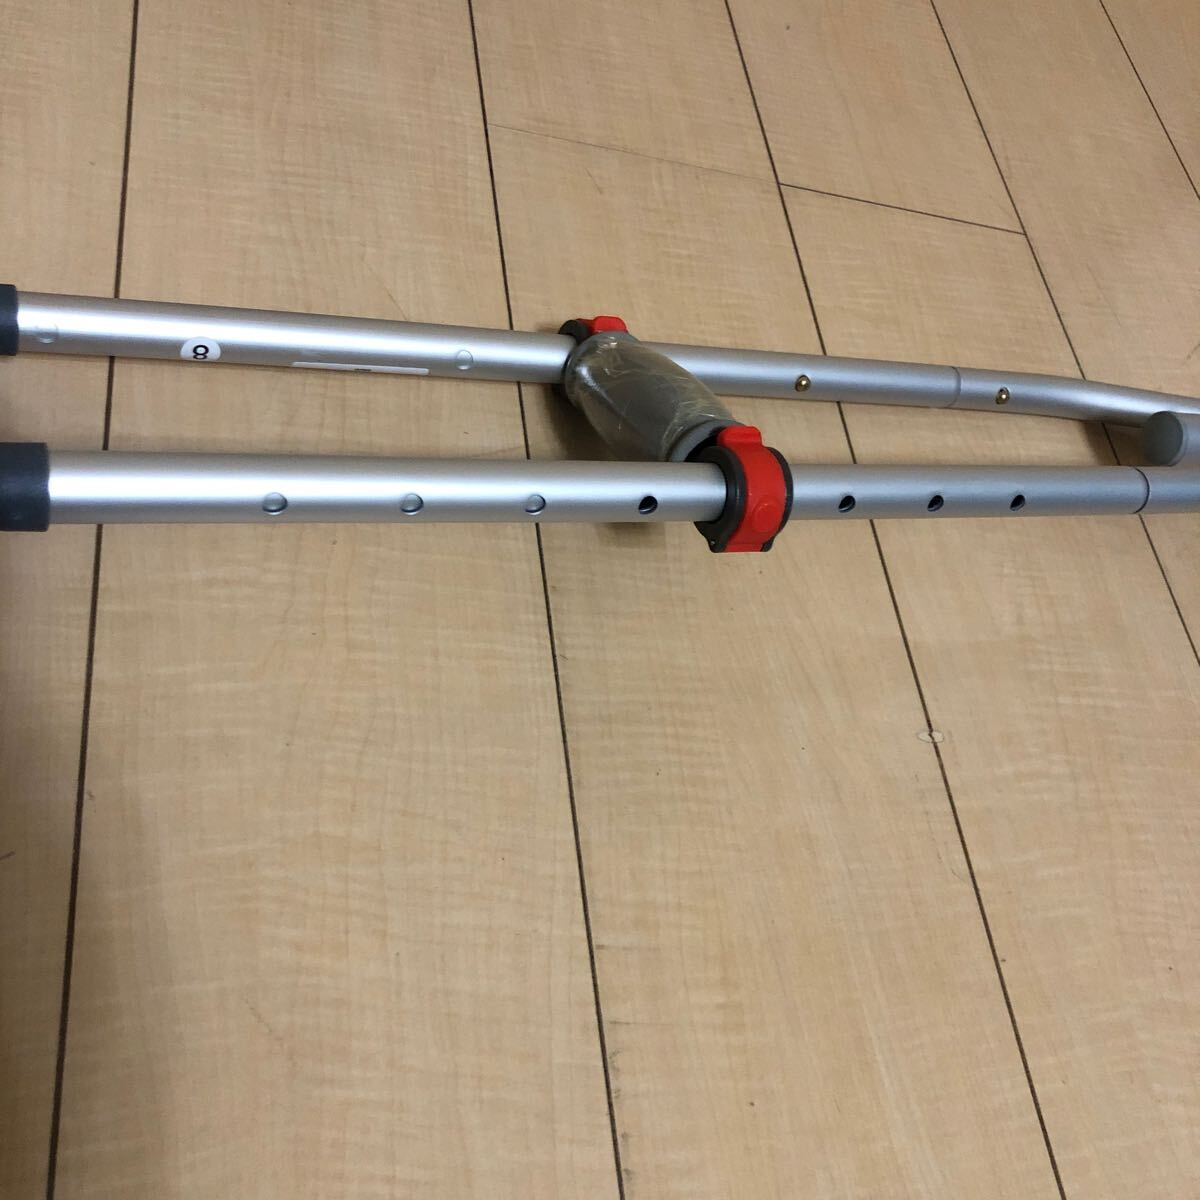  crutches walking assistance maximum adjustment : approximately 144 X 97 cm flexible type easy adjustment aluminium alloy made river north power .( made in China )